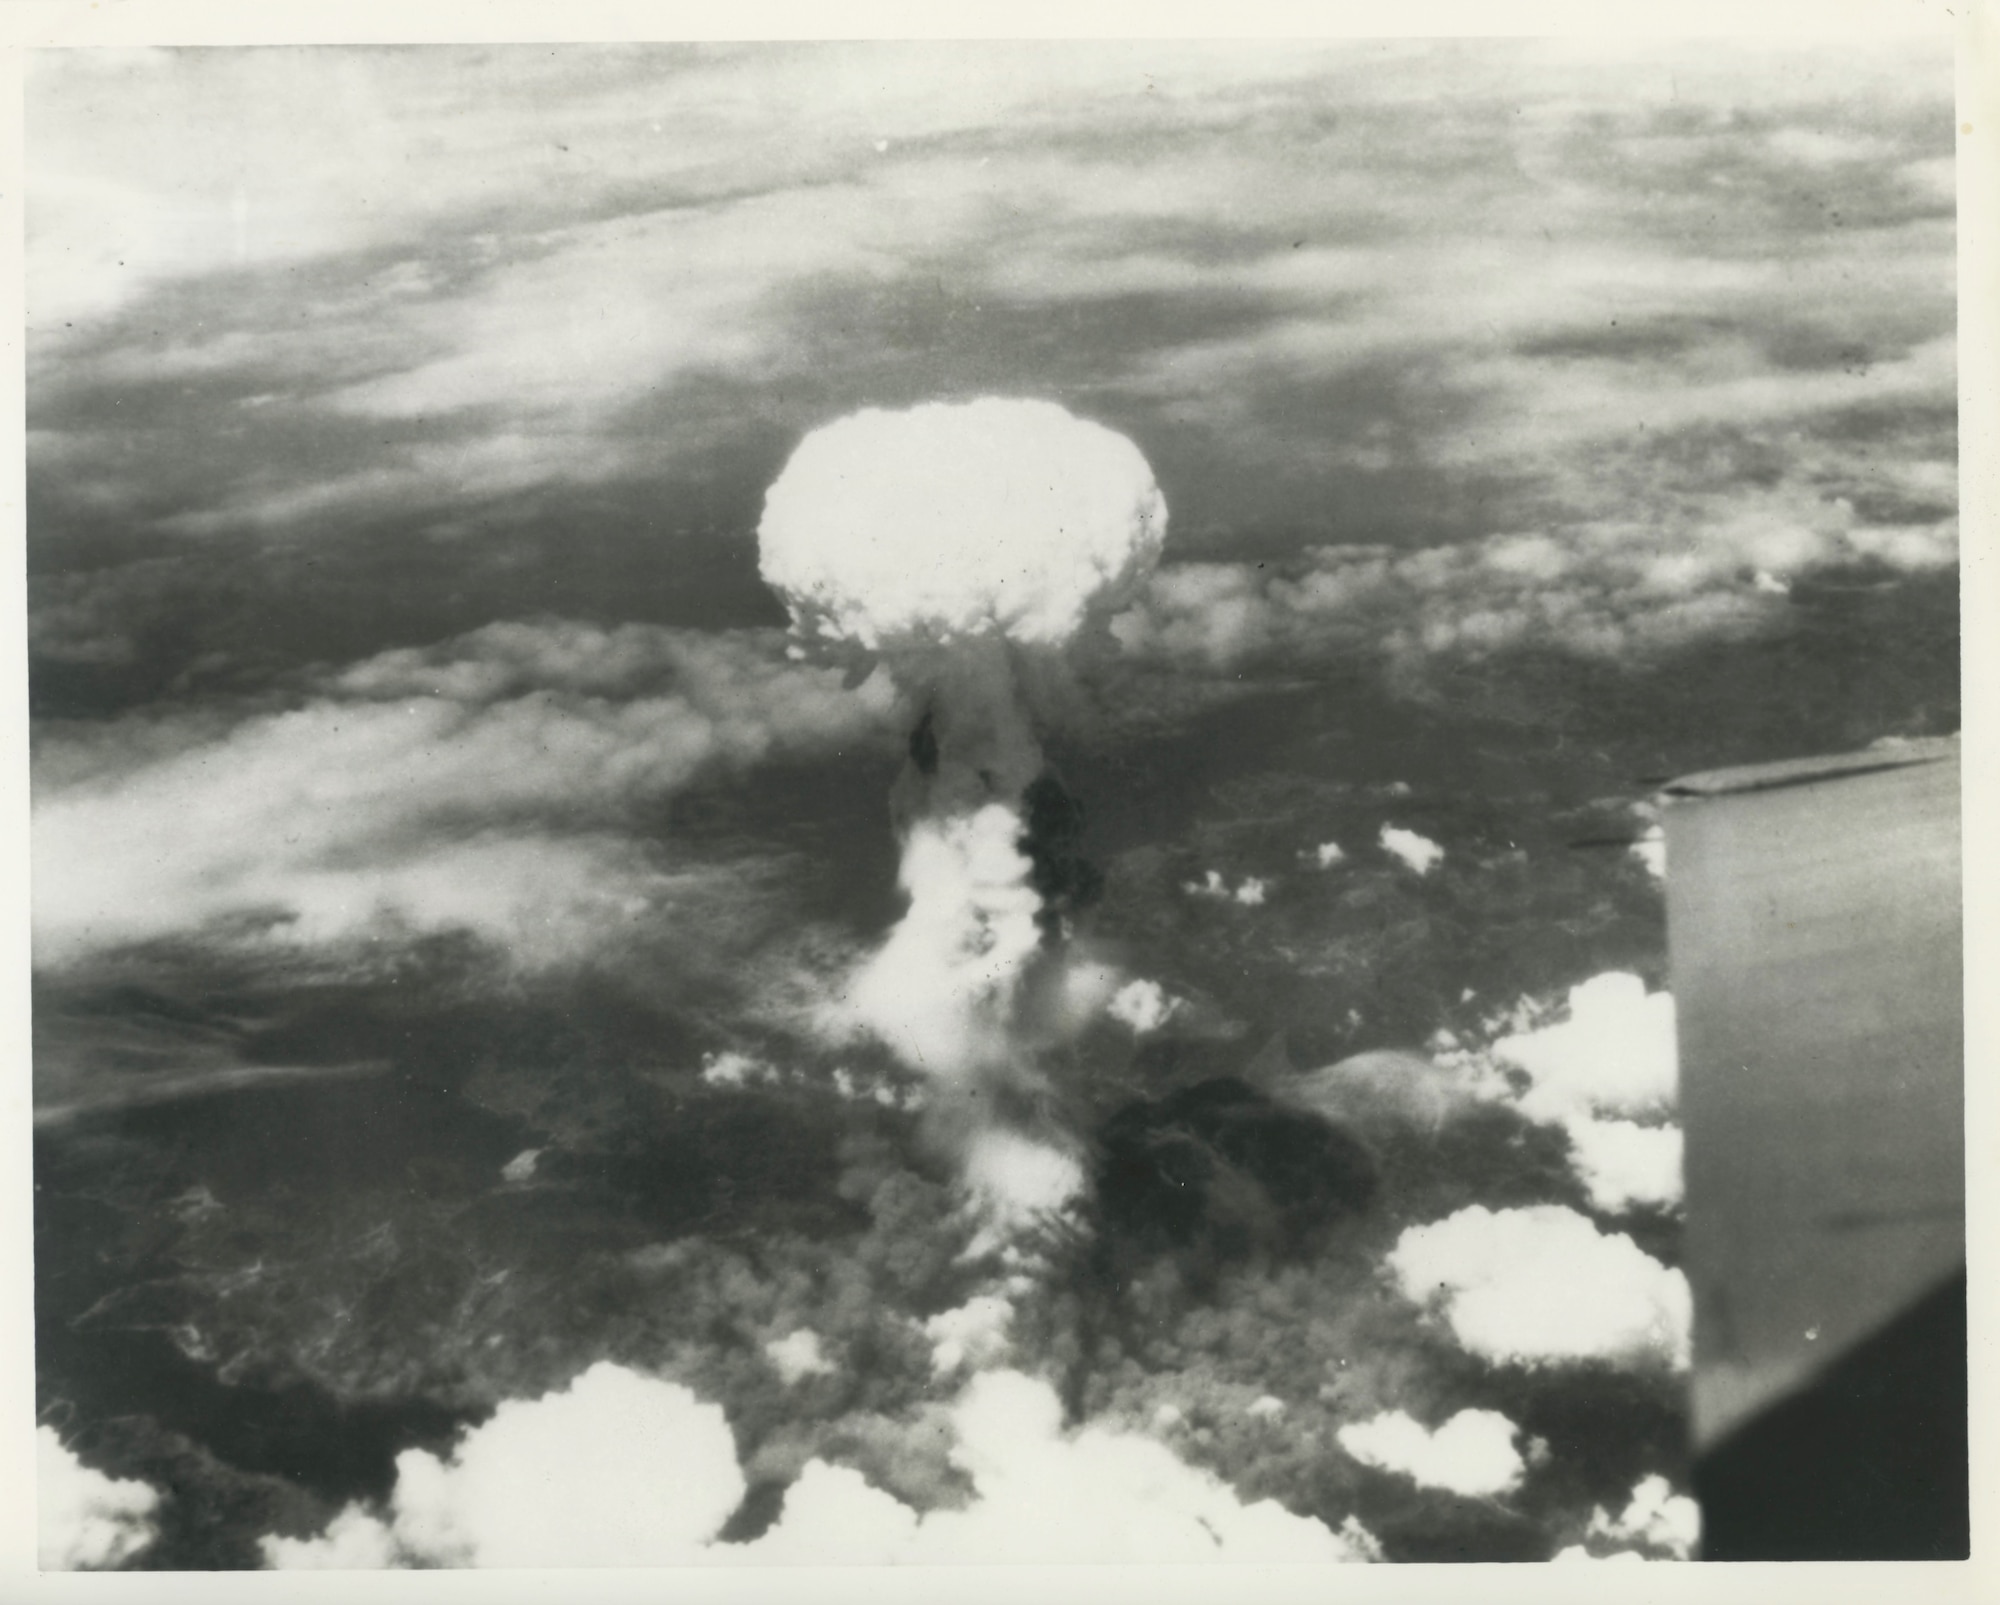 The mushroom cloud blooms after the 509th Composite Group dropped the atomic bomb nicknamed "Fat Boy" on August 9, 1945, over Nagasaki, Japan. (Courtesy photo)